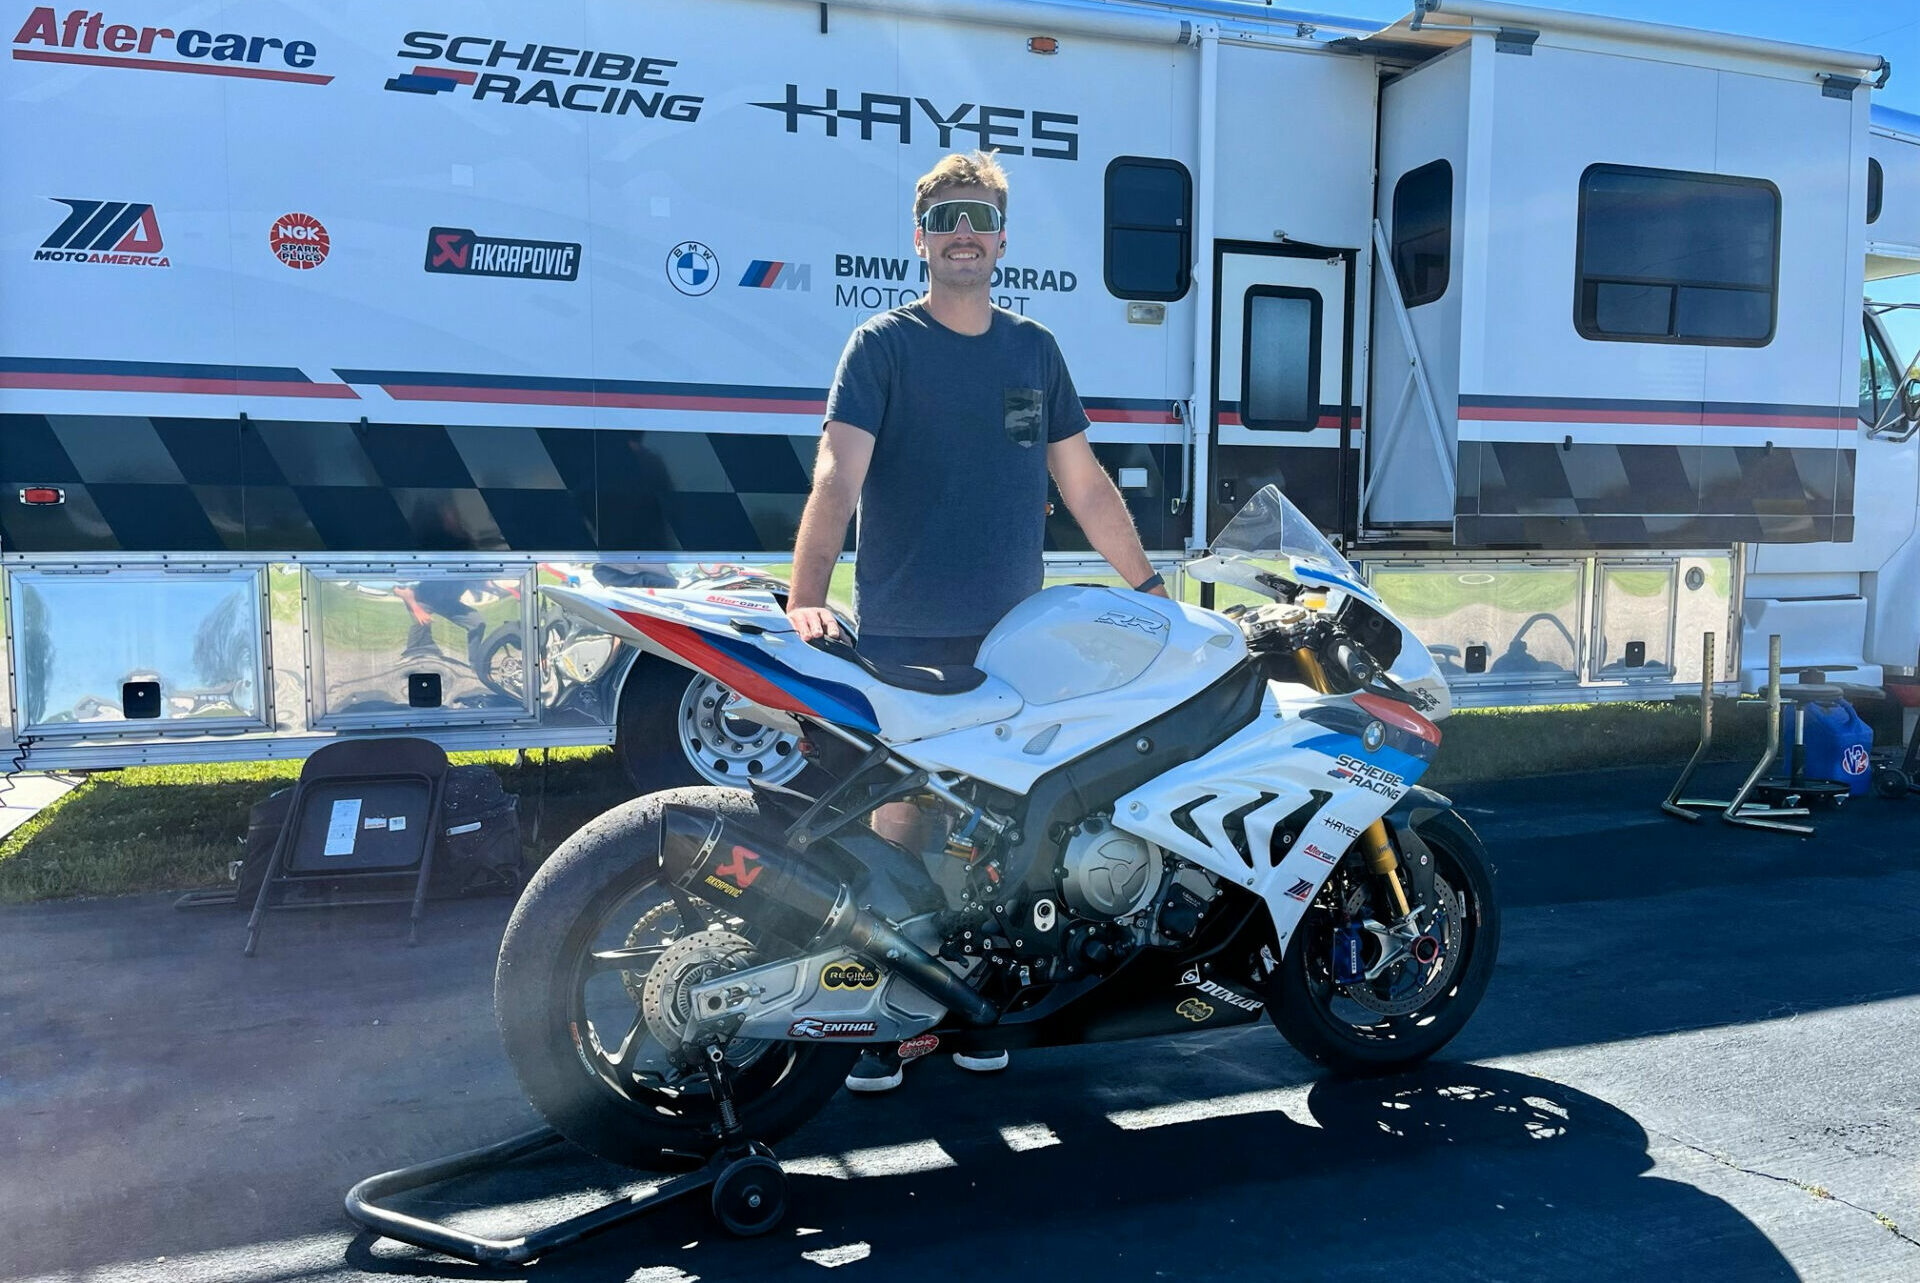 Ezra Beaubier and his new Aftercare Scheibe Racing BMW S 1000 RR Superbike. Photo courtesy Aftercare Scheibe Racing.